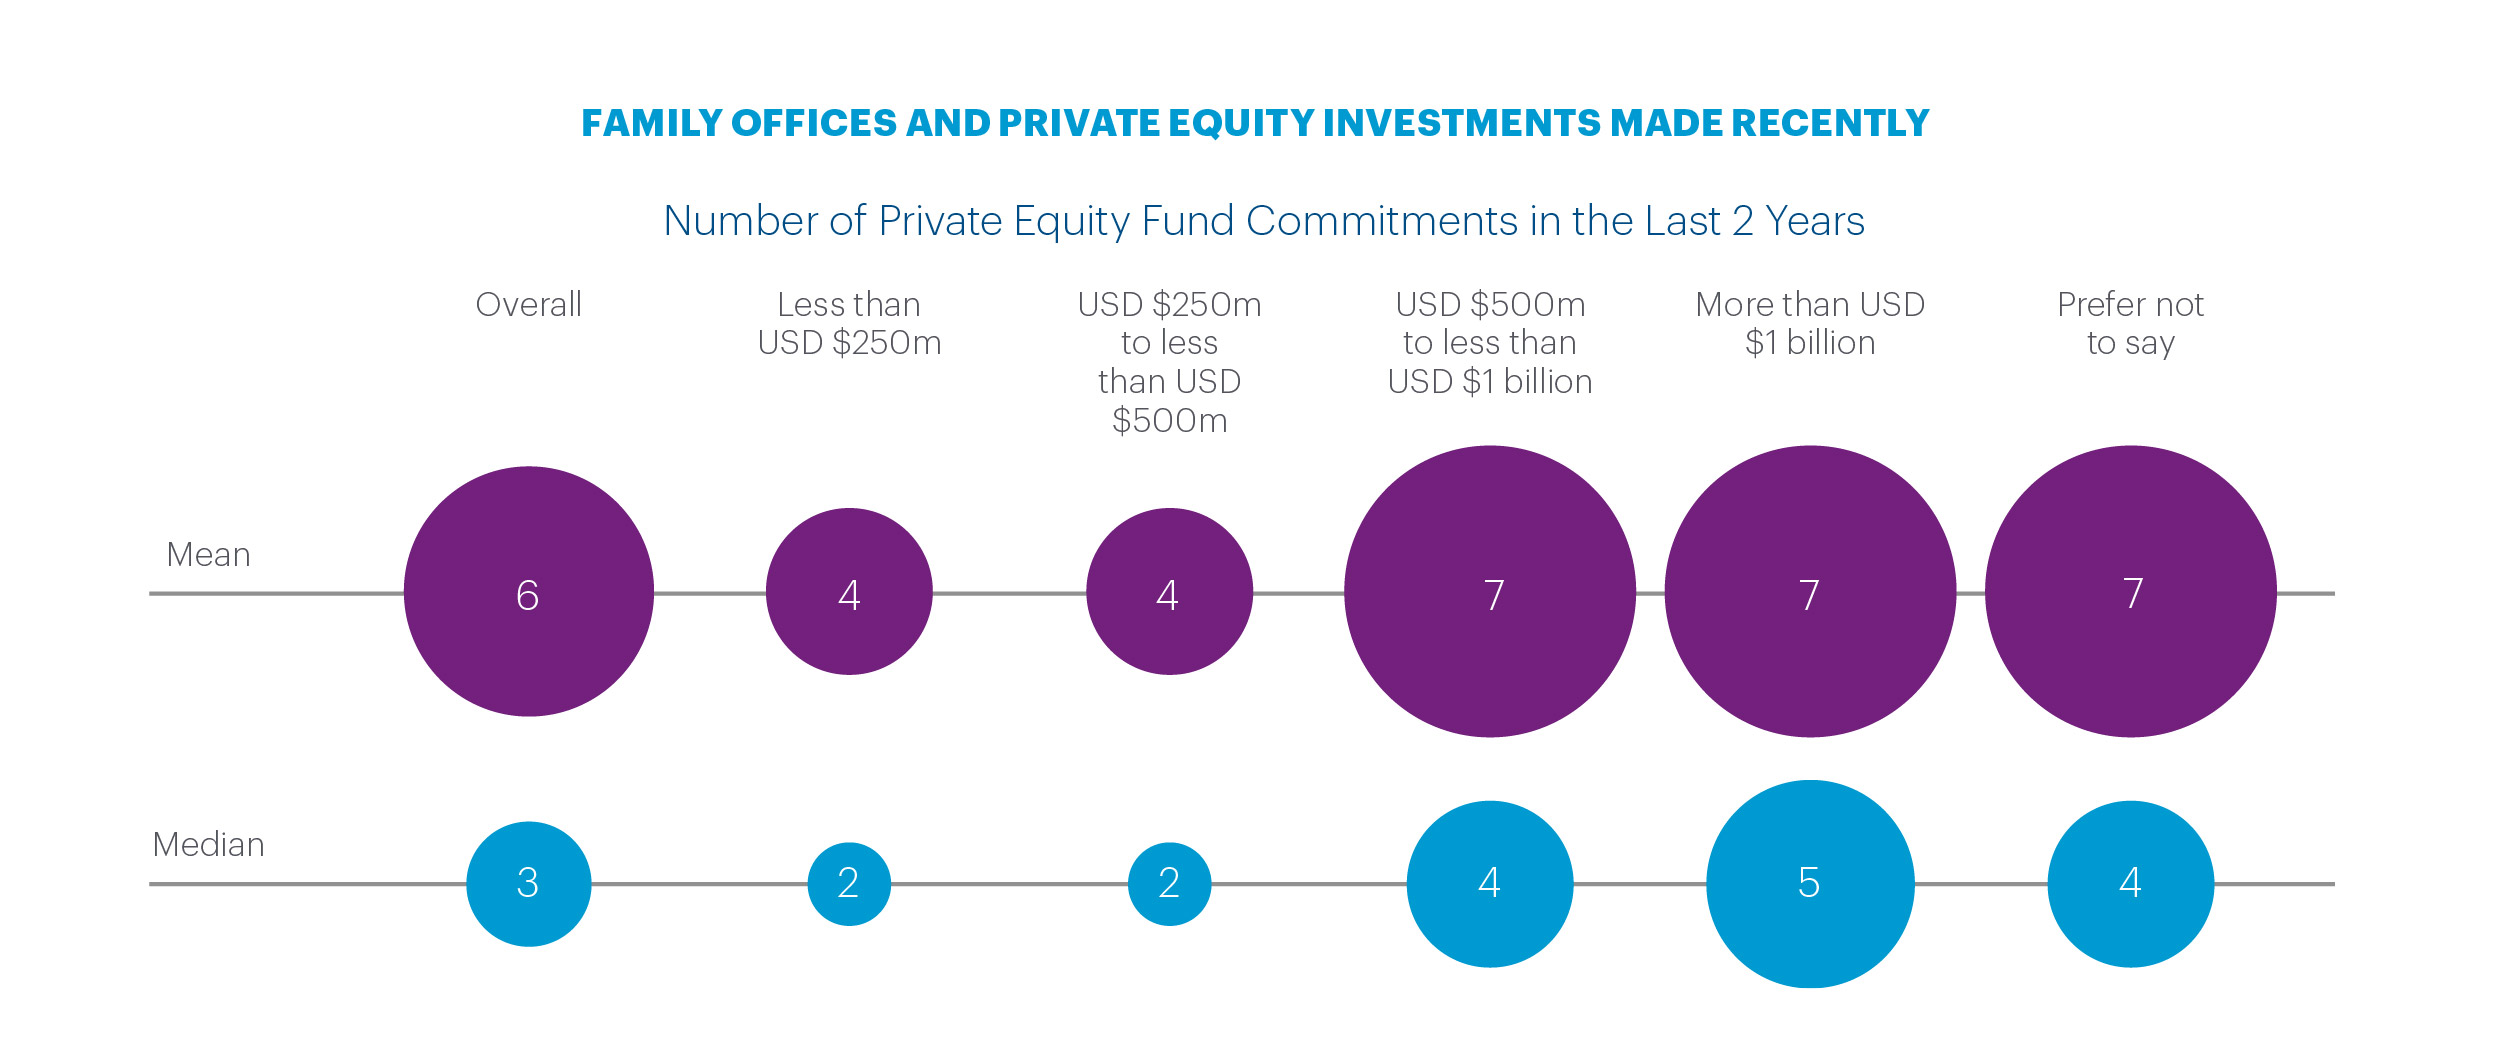 FO and private equity investments made recently